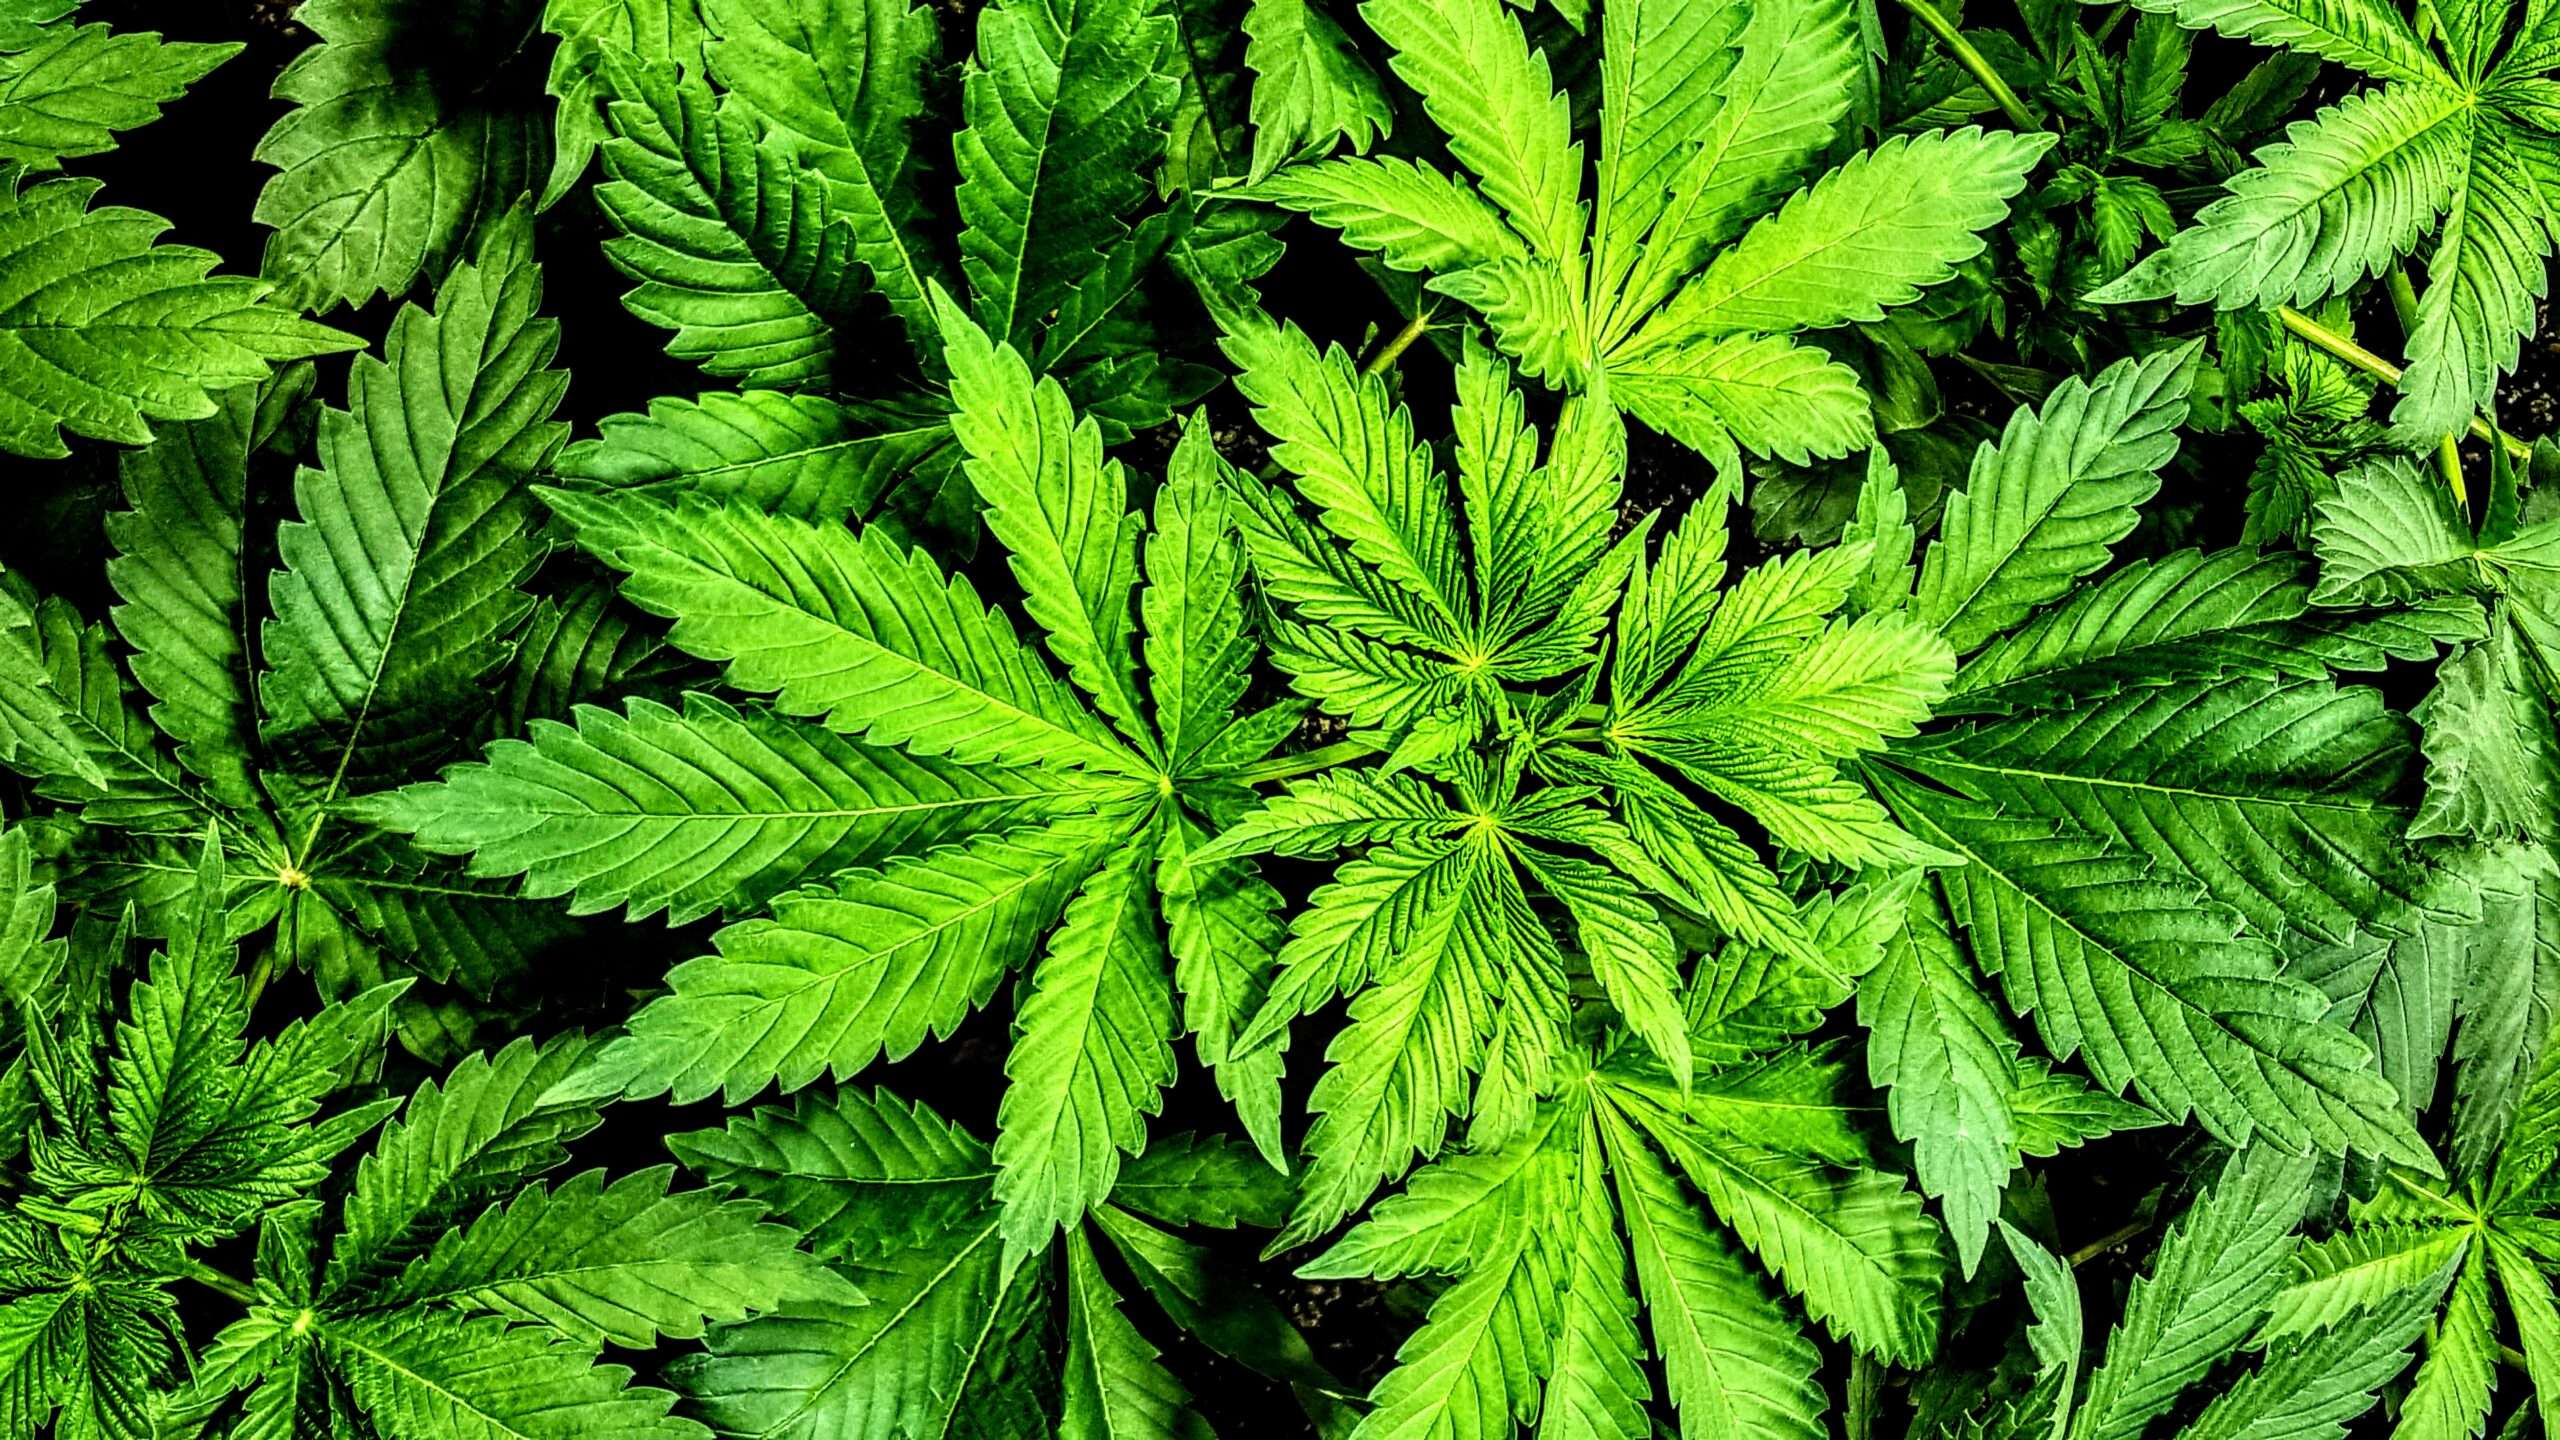 Rhode Island Becomes the 19th State To Legalize Recreational Marijuana